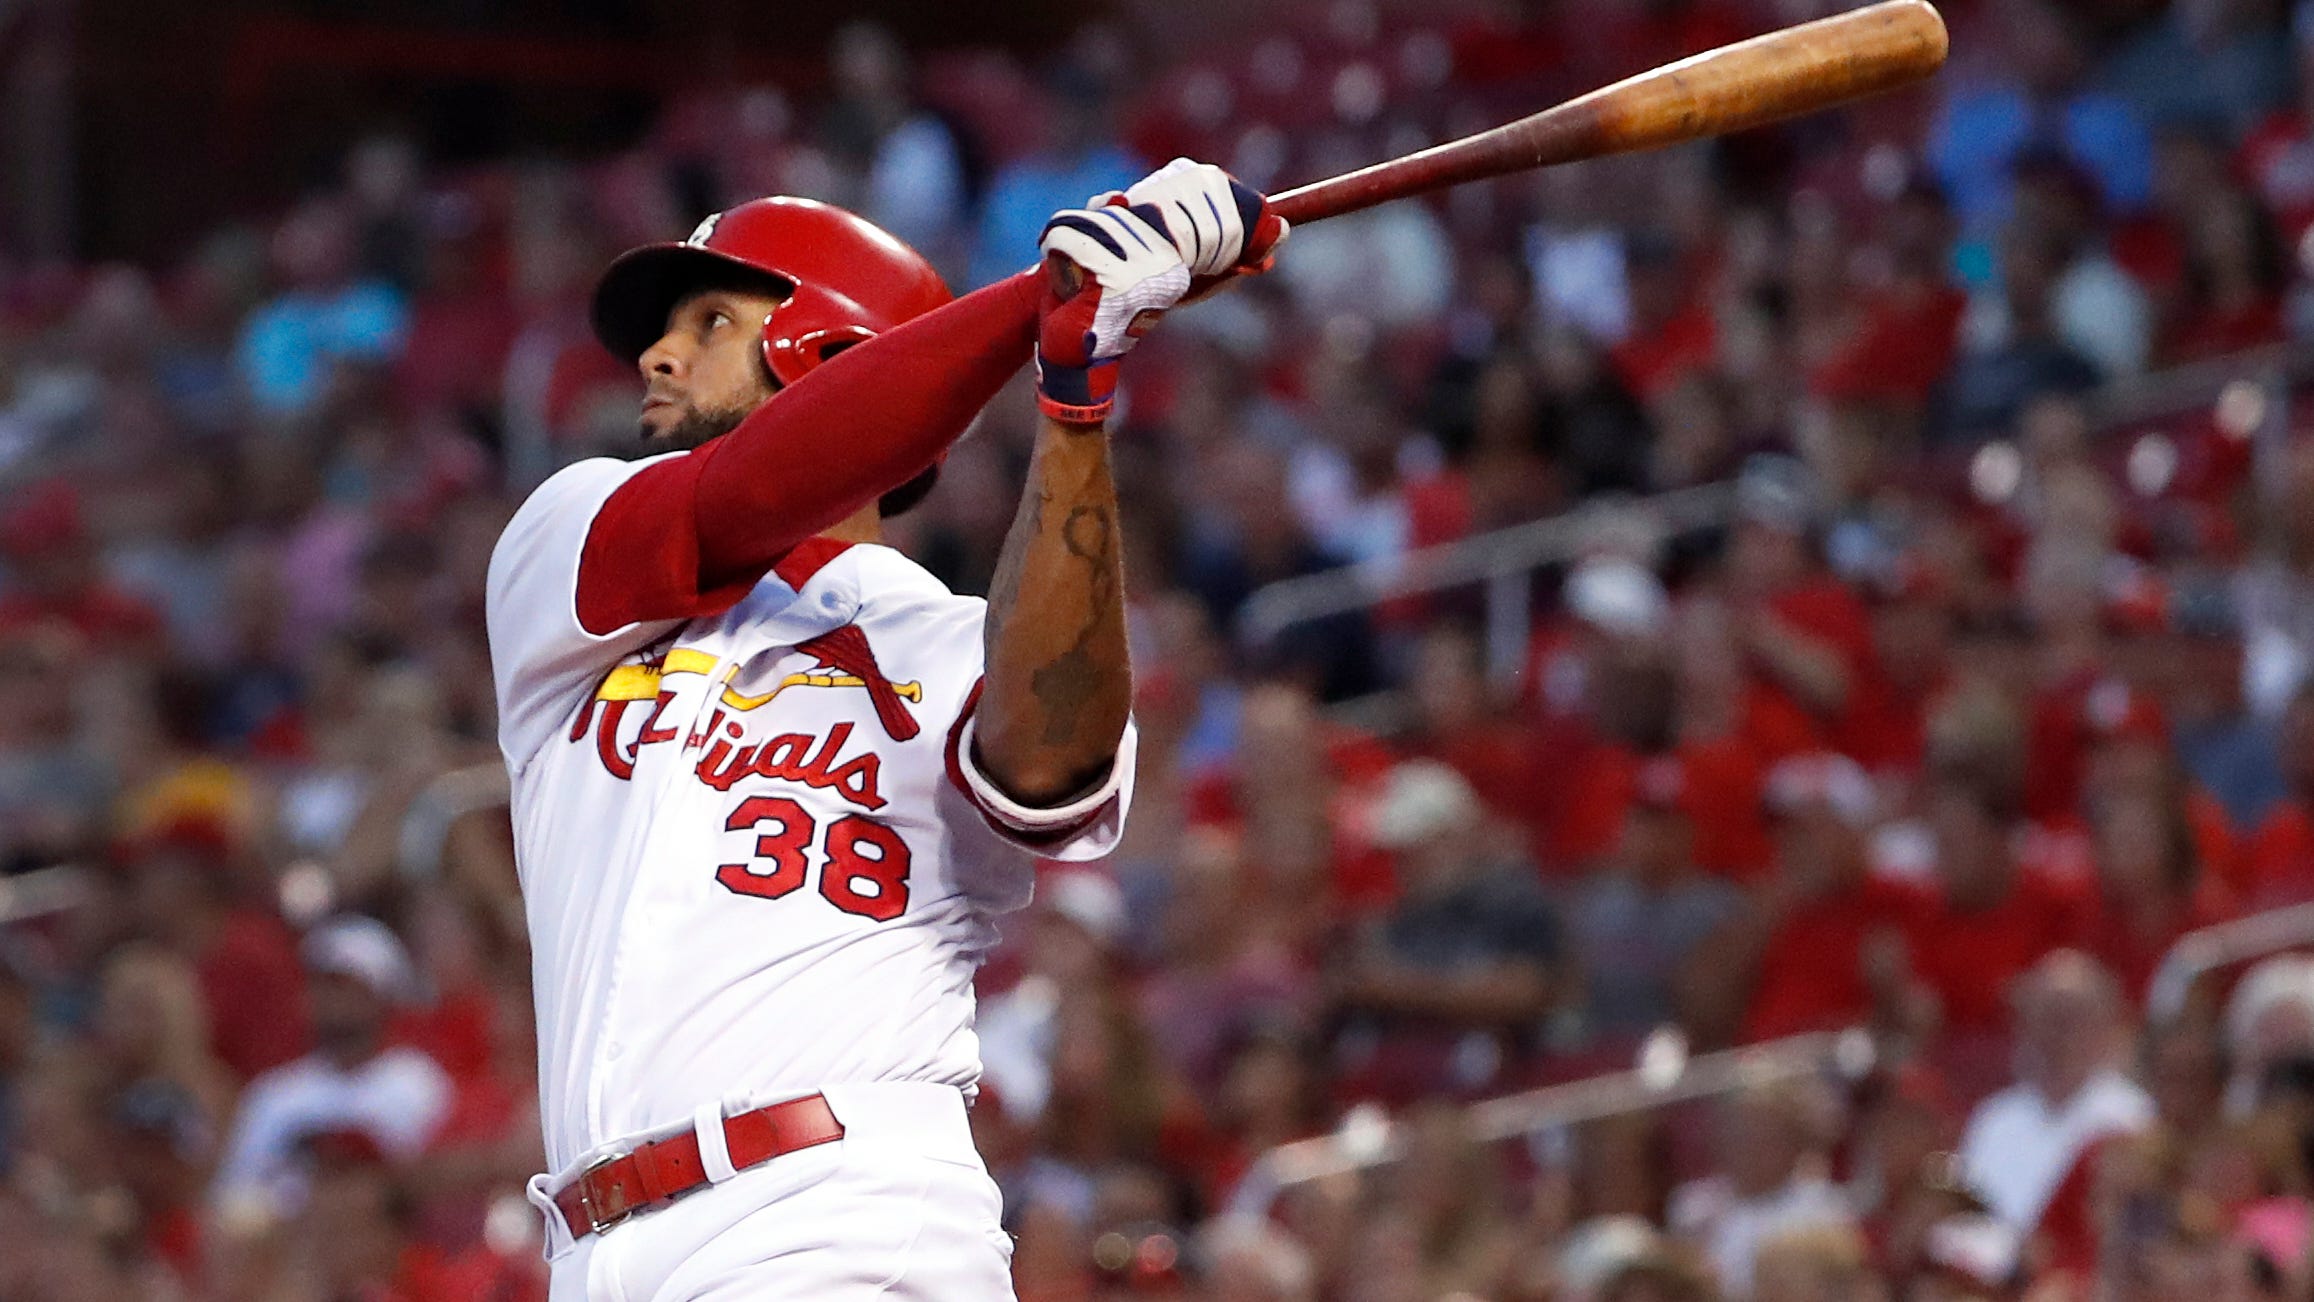 Rays-Cardinals: St. Louis trades Jose Martinez to Tampa for prospect